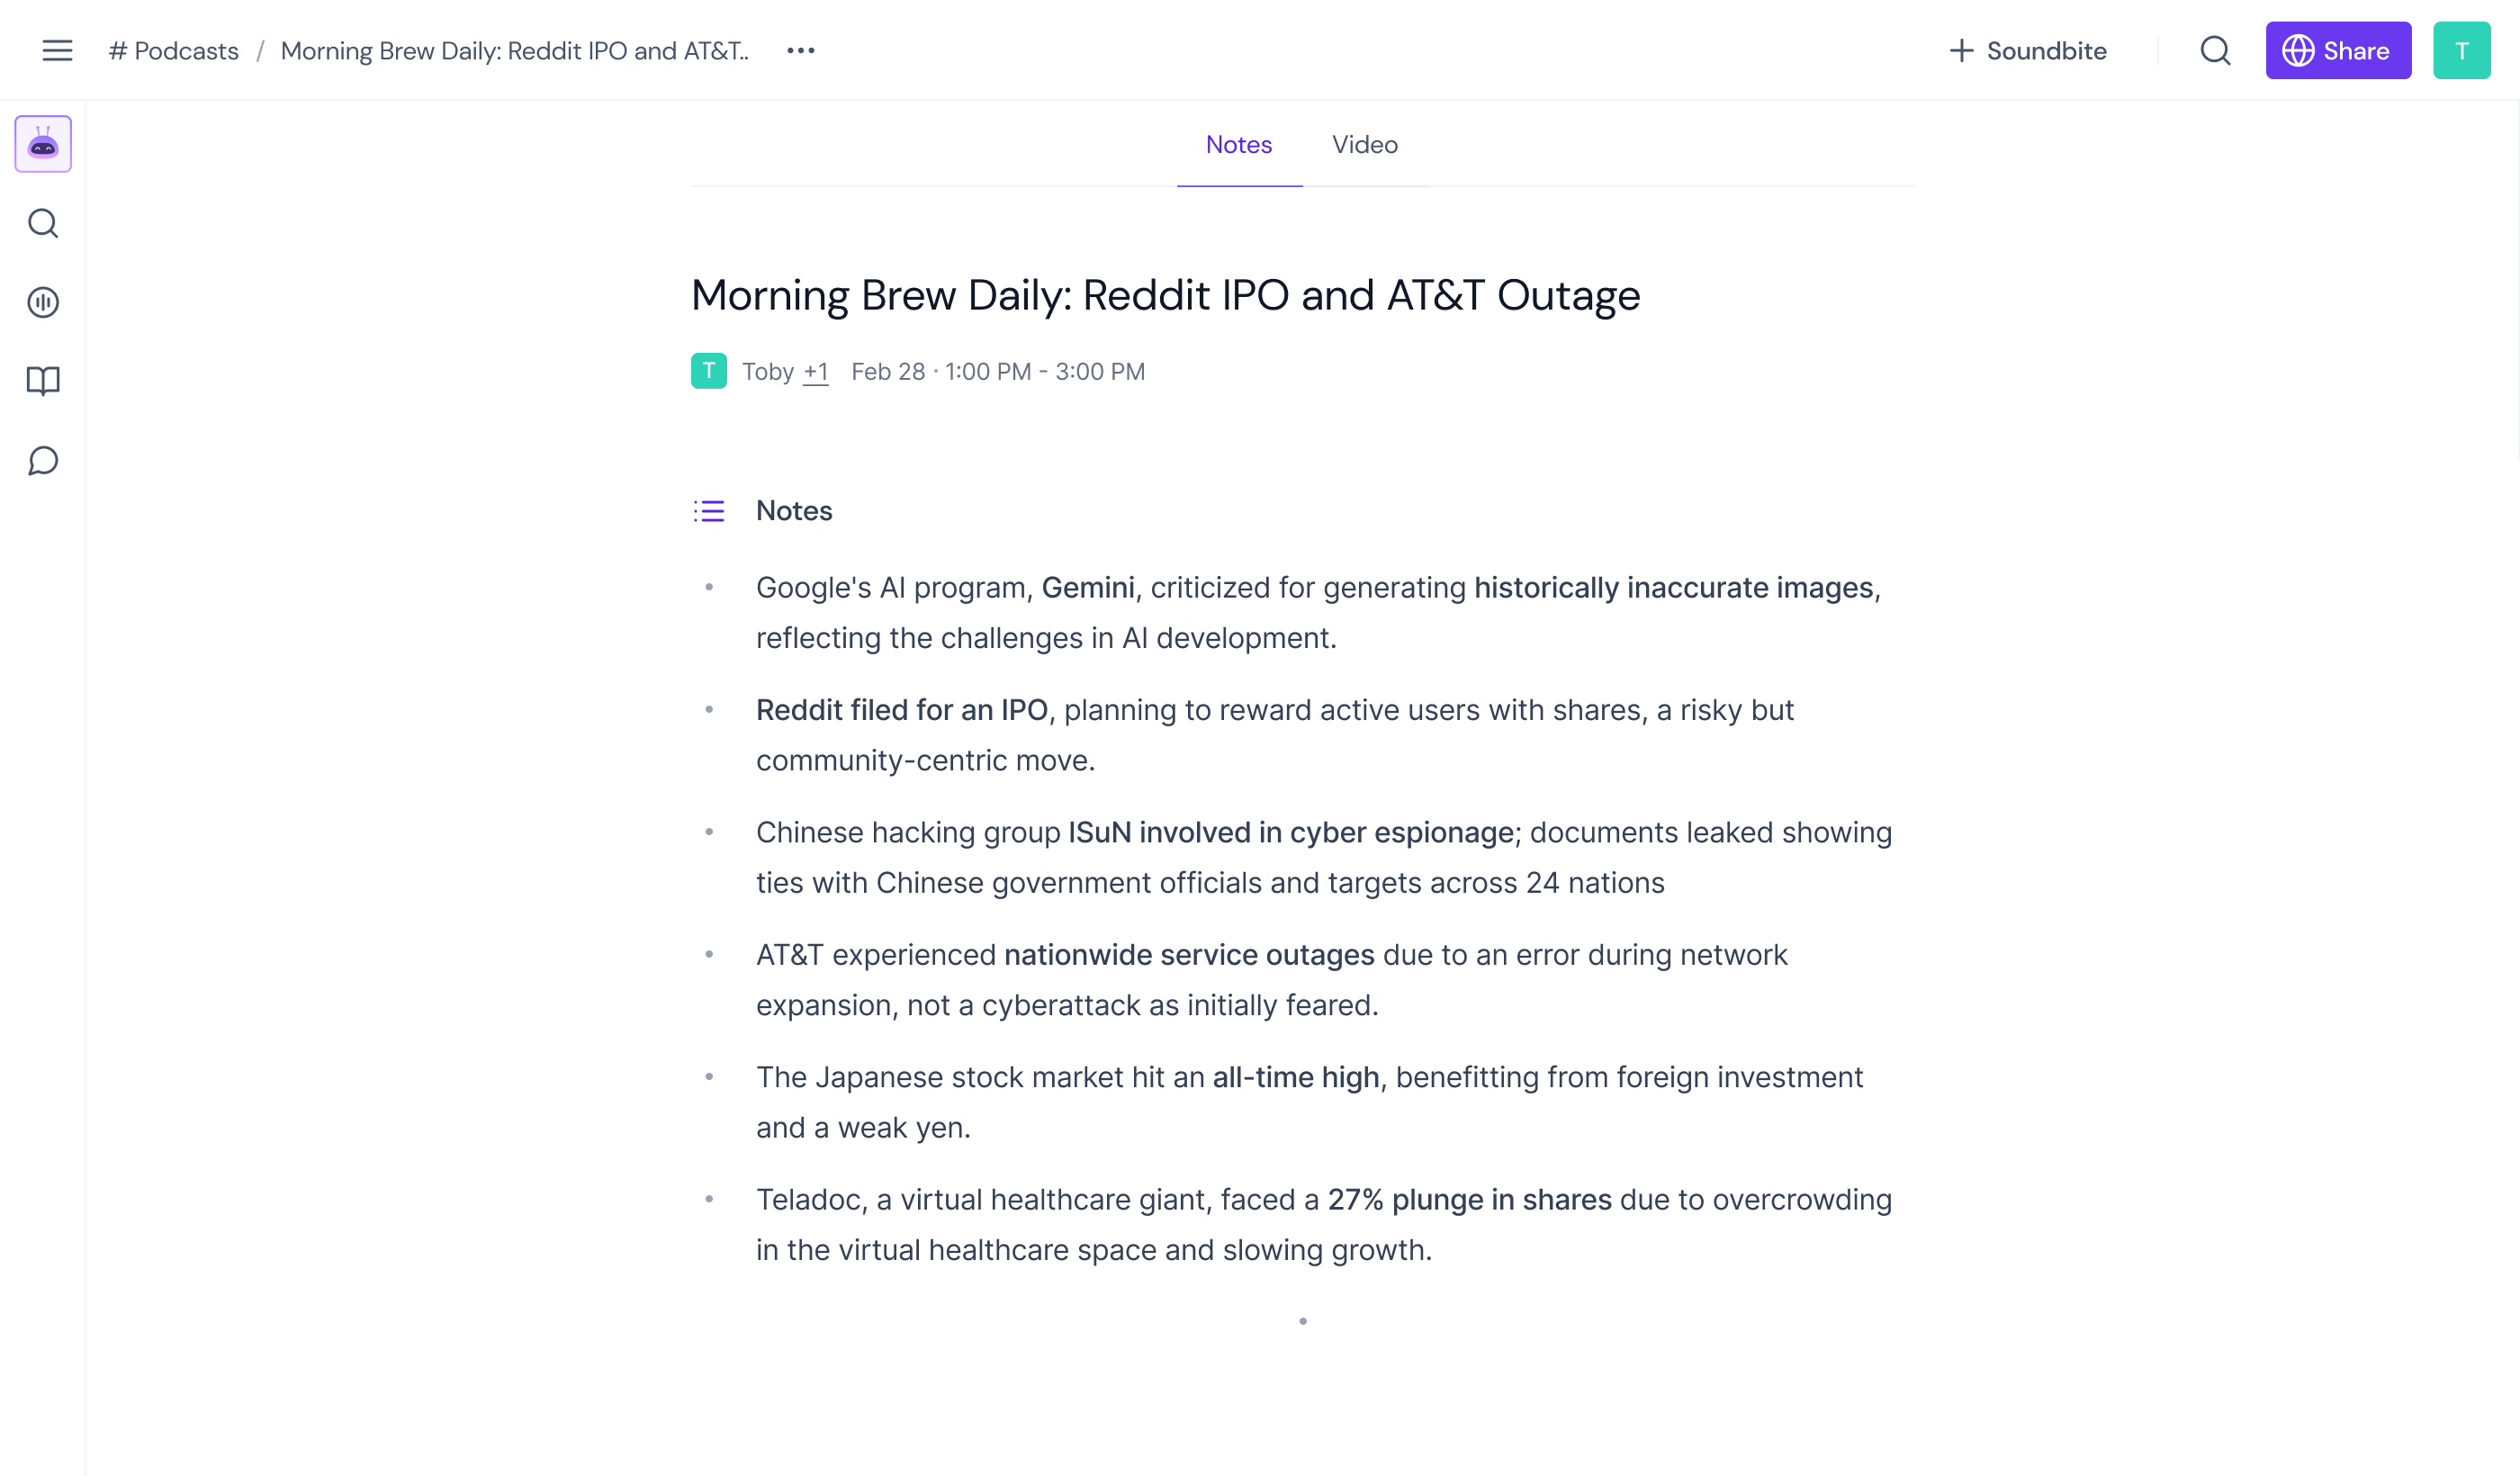 Morning Brew Daily: Why Reddit IPO Favors Loyal Users & The Massive AT&T Outage